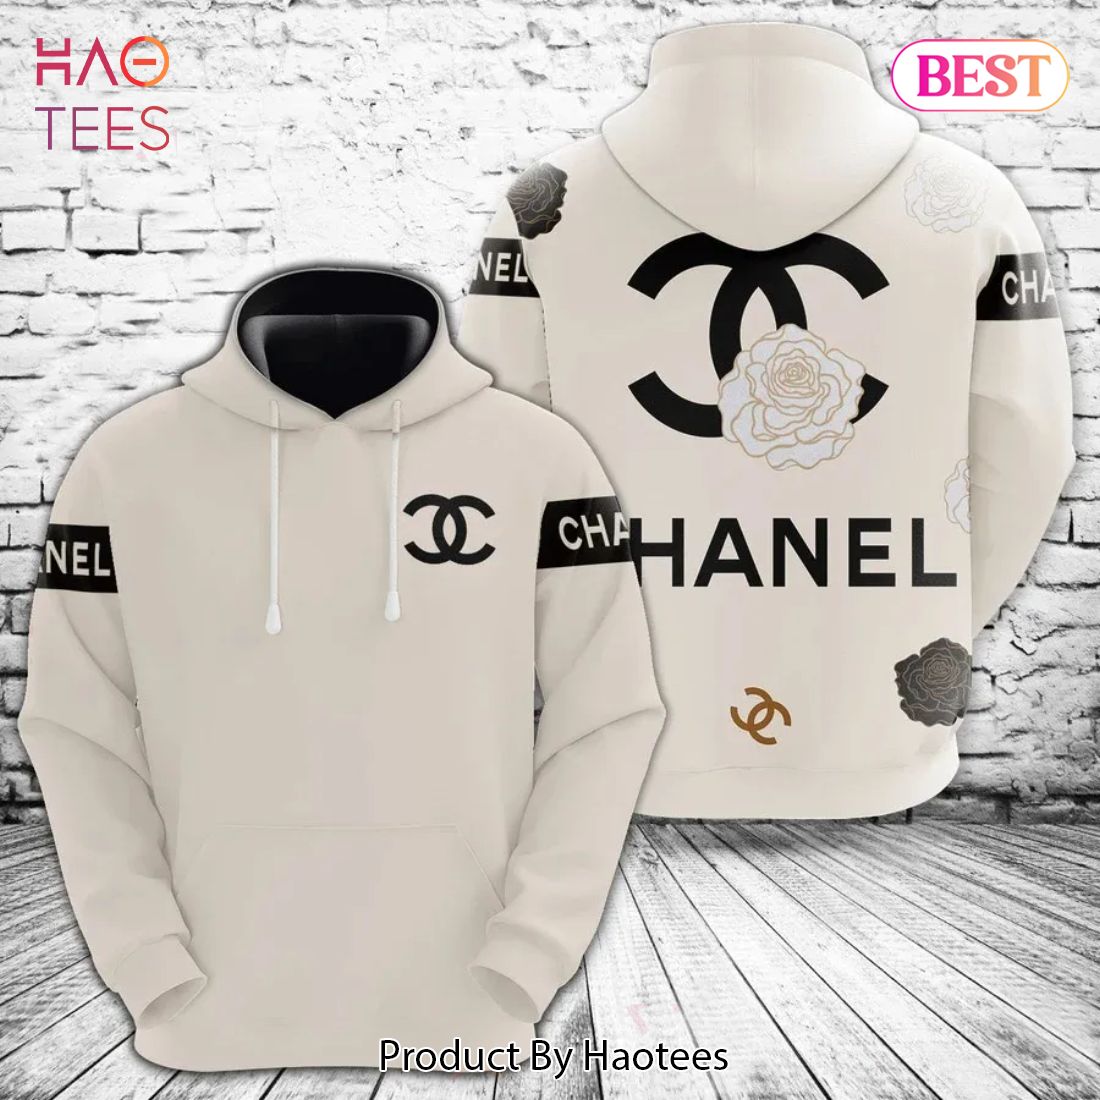 Chanel White Unisex Hoodie For Men Women Luxury Brand Clothing Clothes Outfit